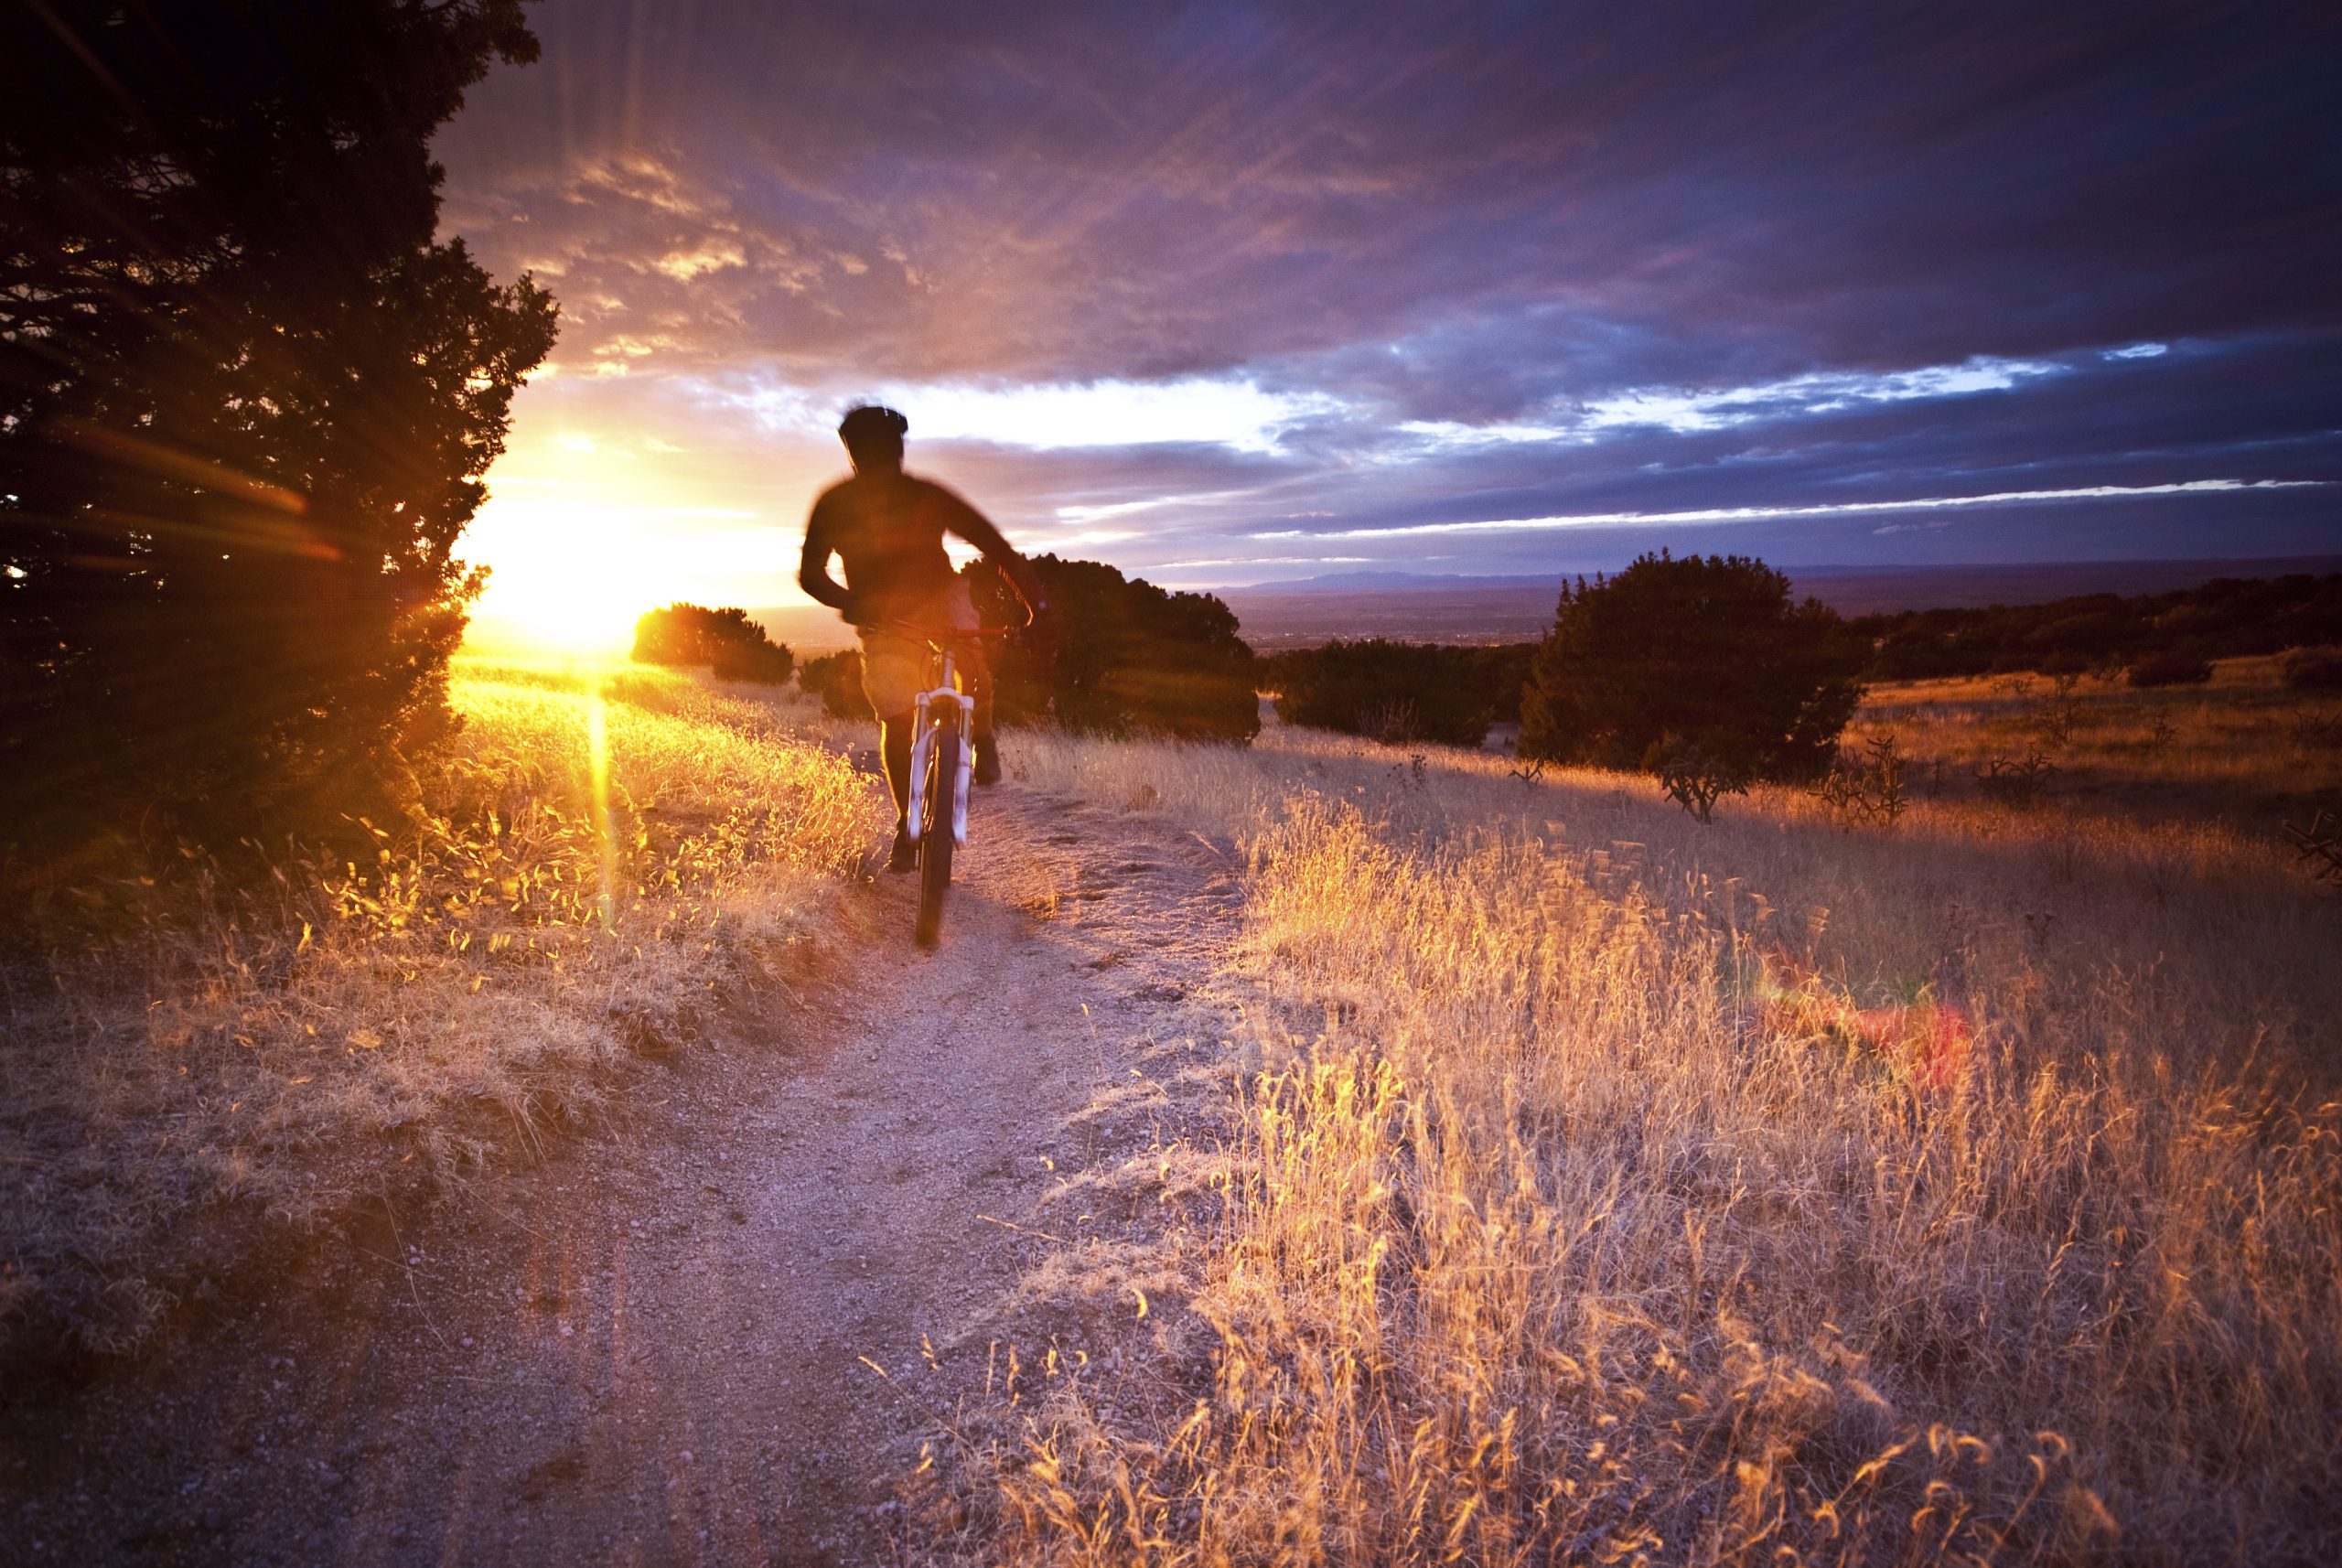 A cyclist riding a cycle on a trail during sunset